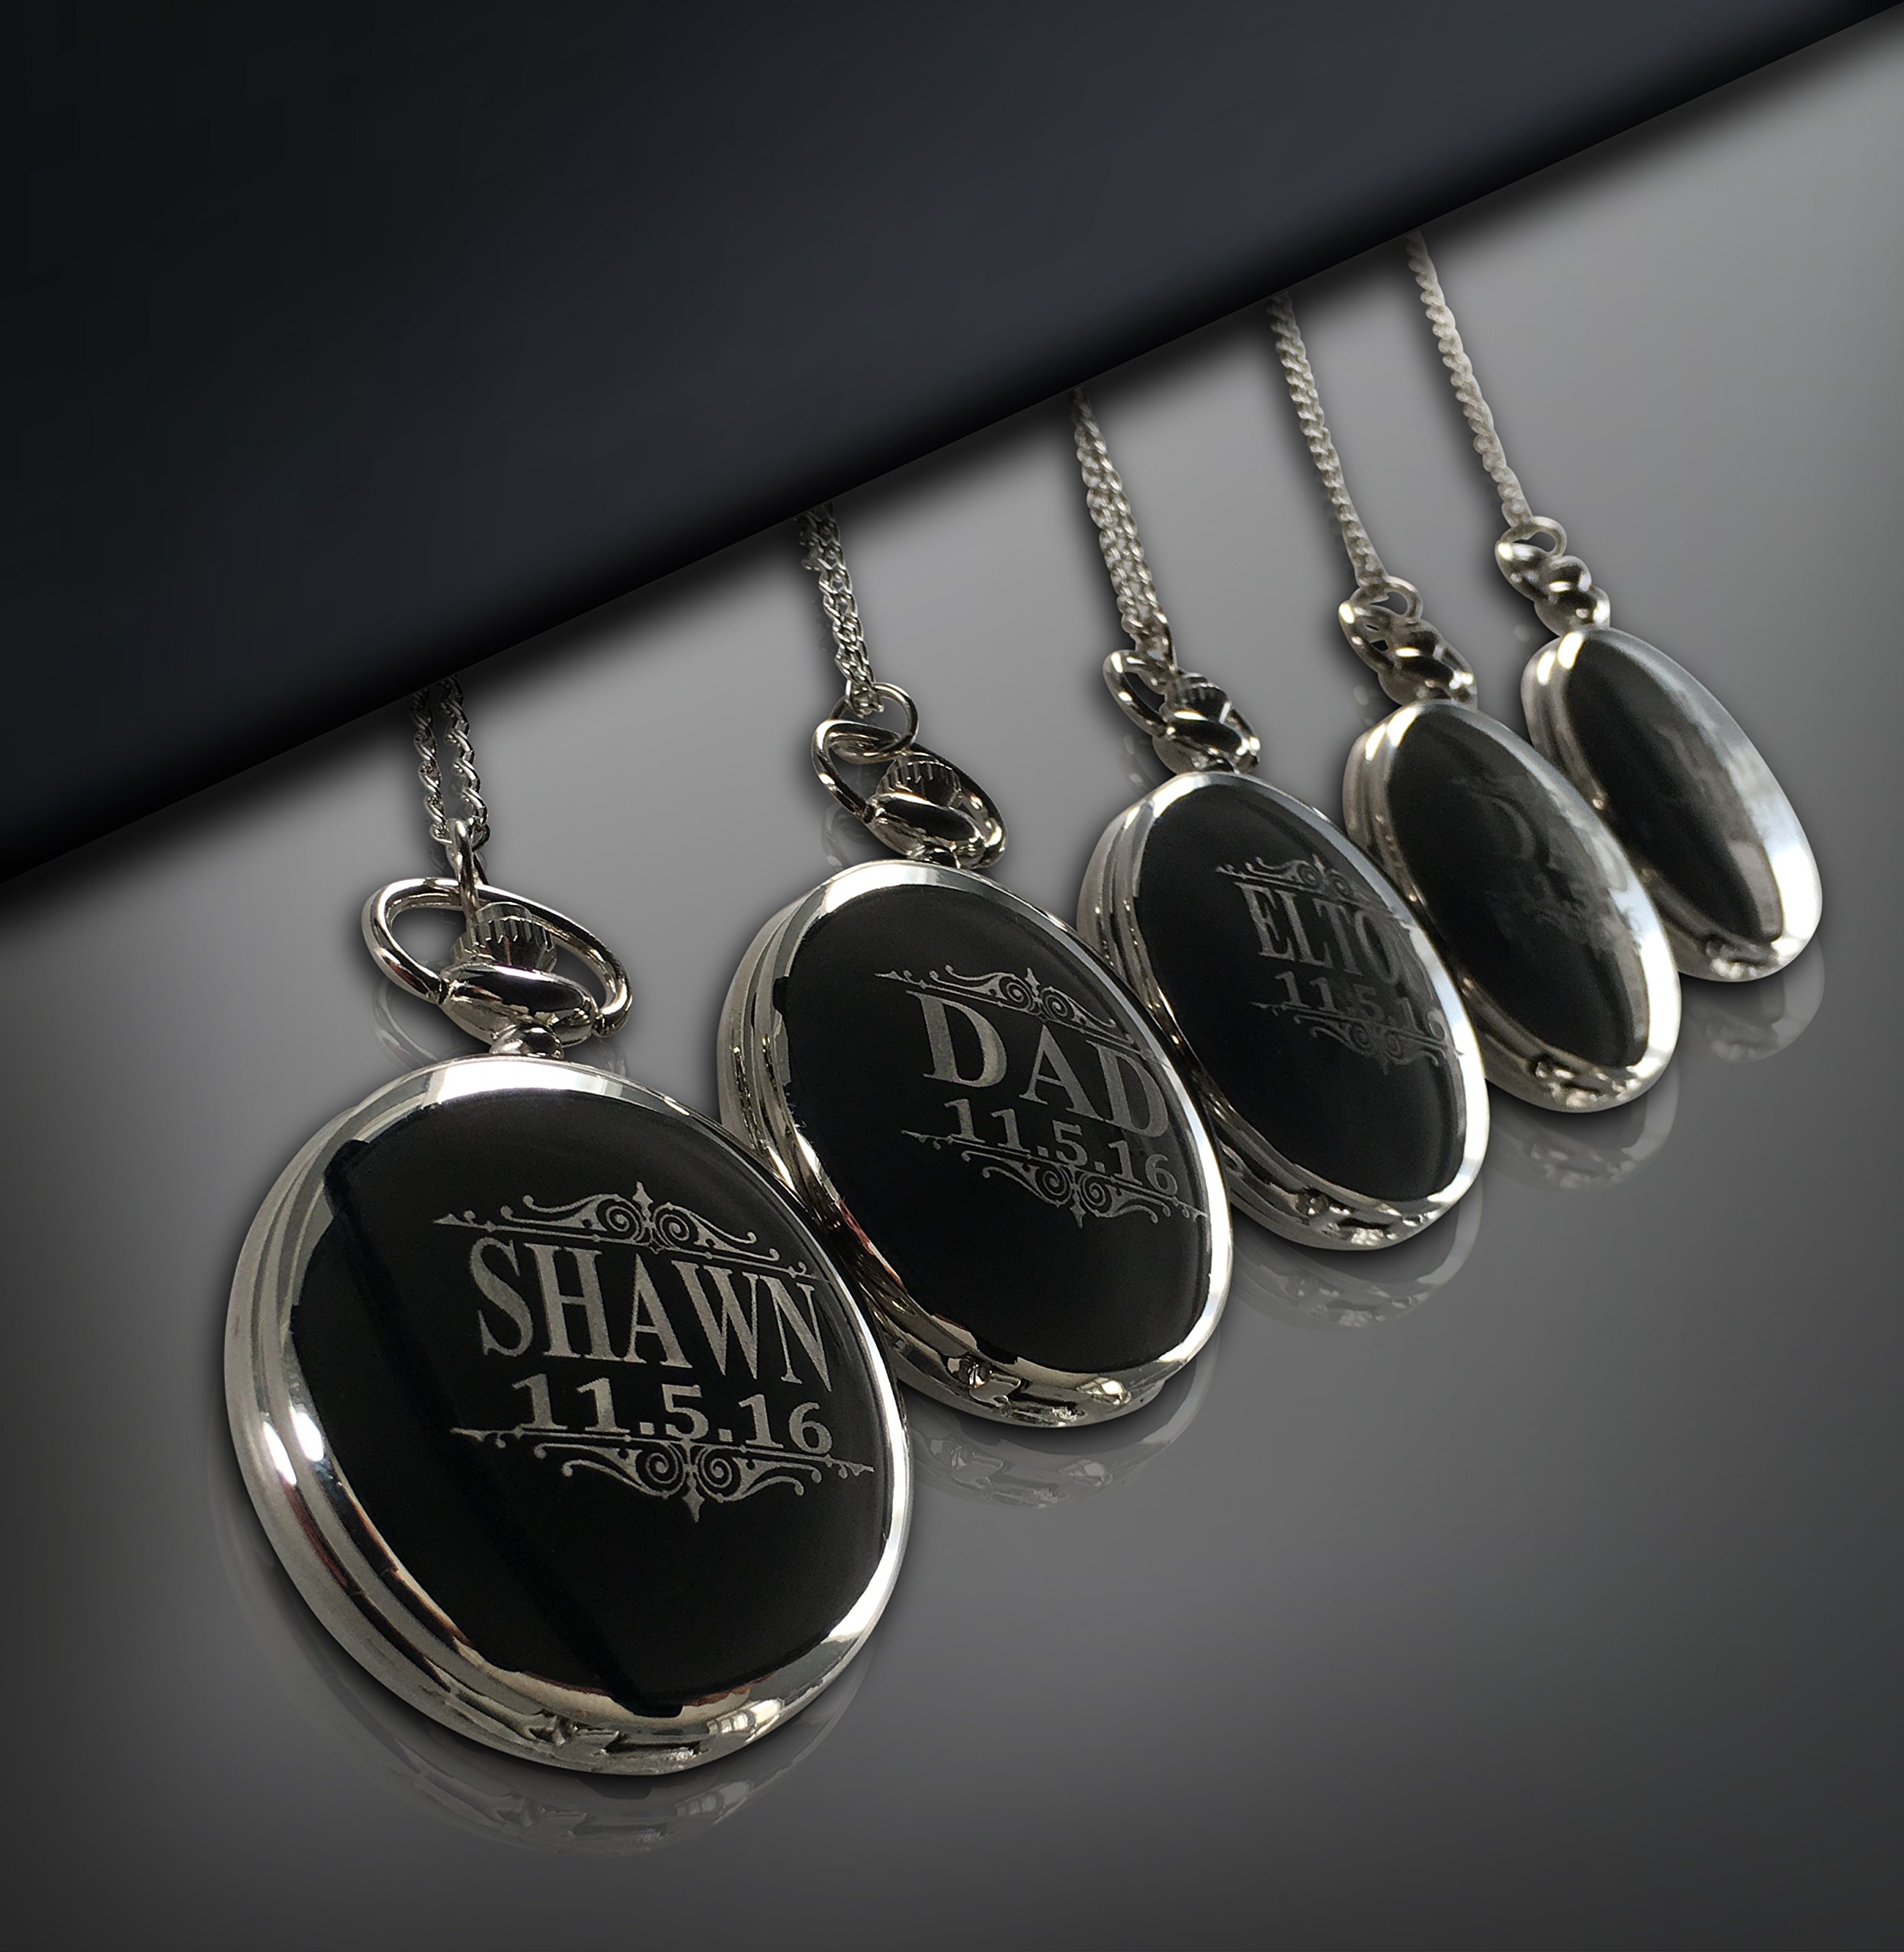 7 Engraved Pocket Watches, Set of 7 Groomsmen Wedding Unique Gifts, Chain, Box and Engraving Included, Comes in 5 Colors, His and her Gifts